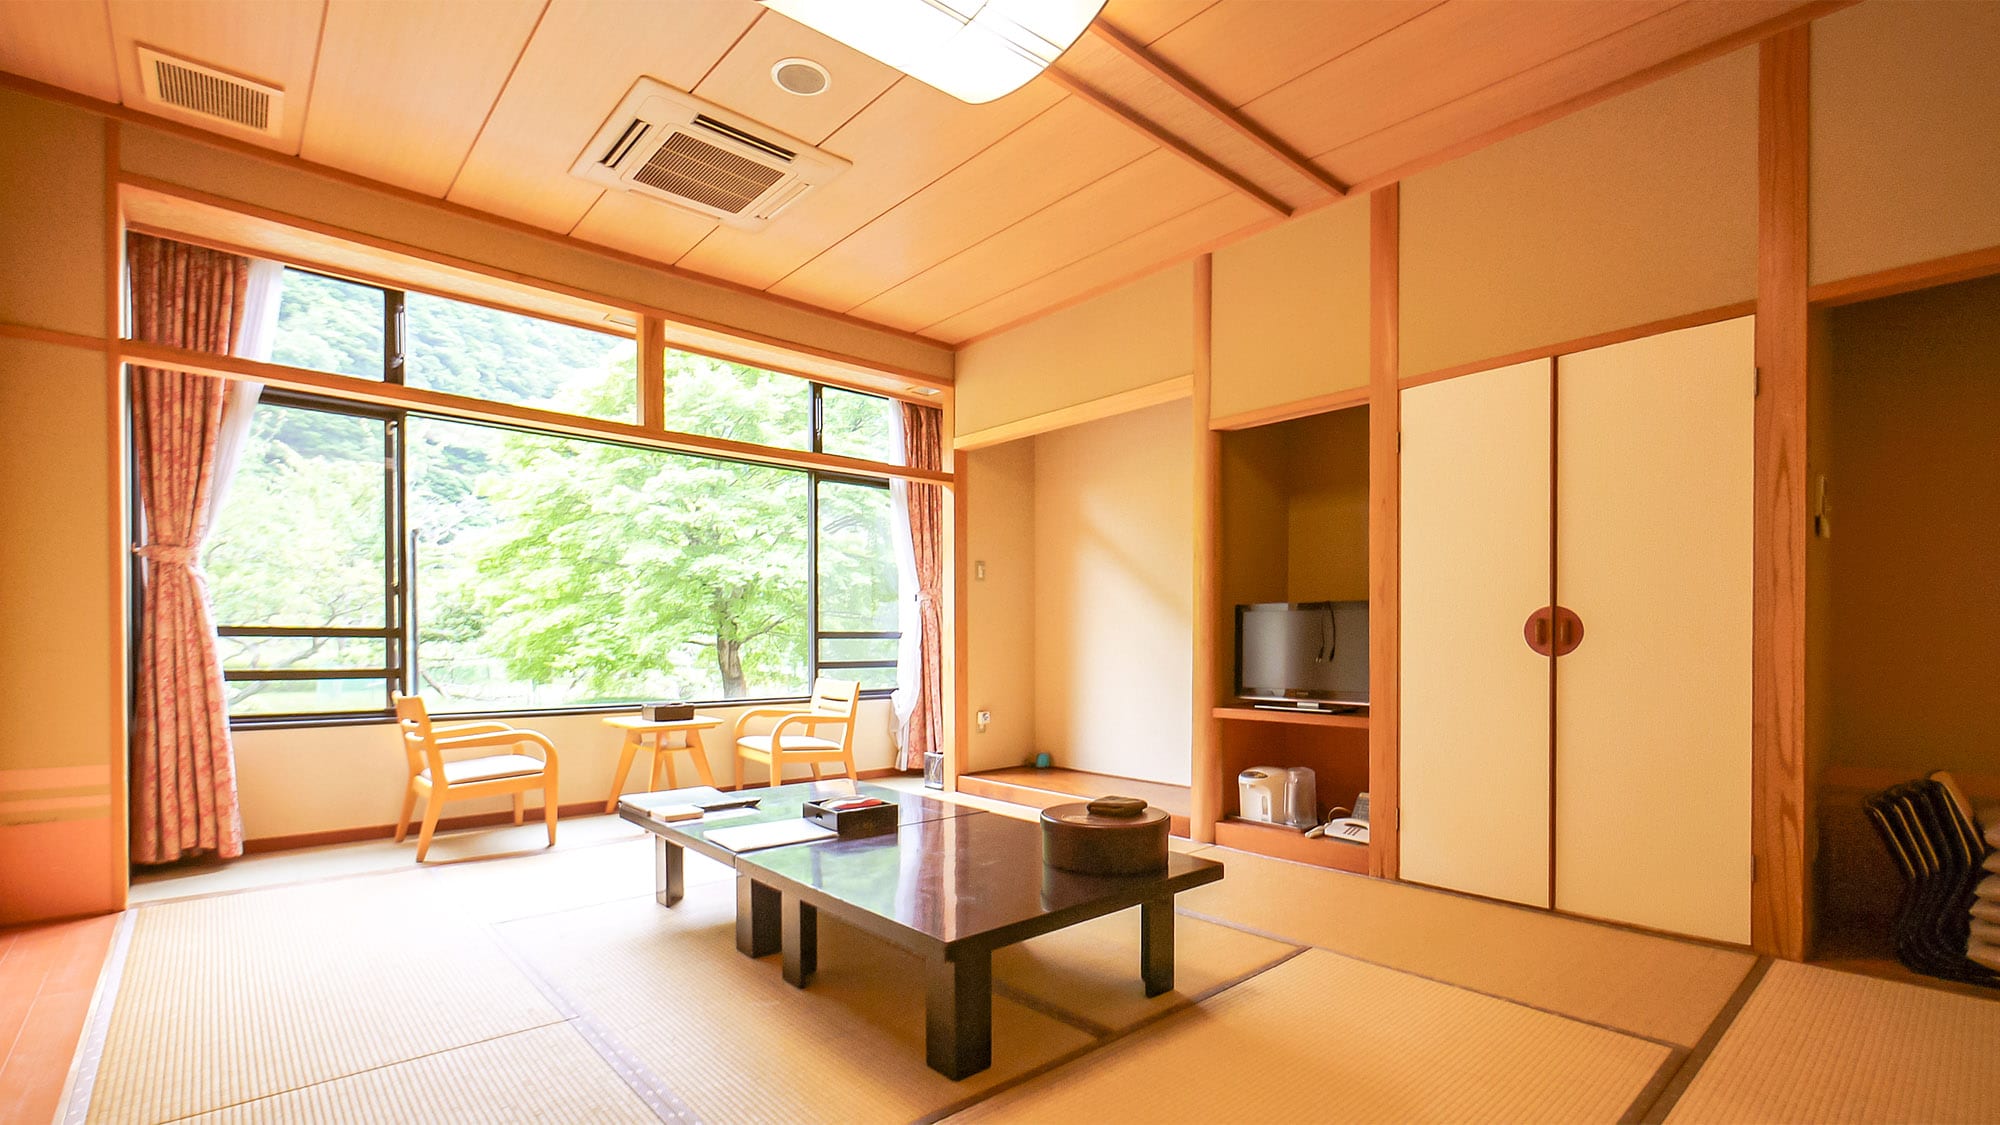 ・ Main building Japanese-style room 10 tatami mats with a wide edge overlooking the greenery of the trees